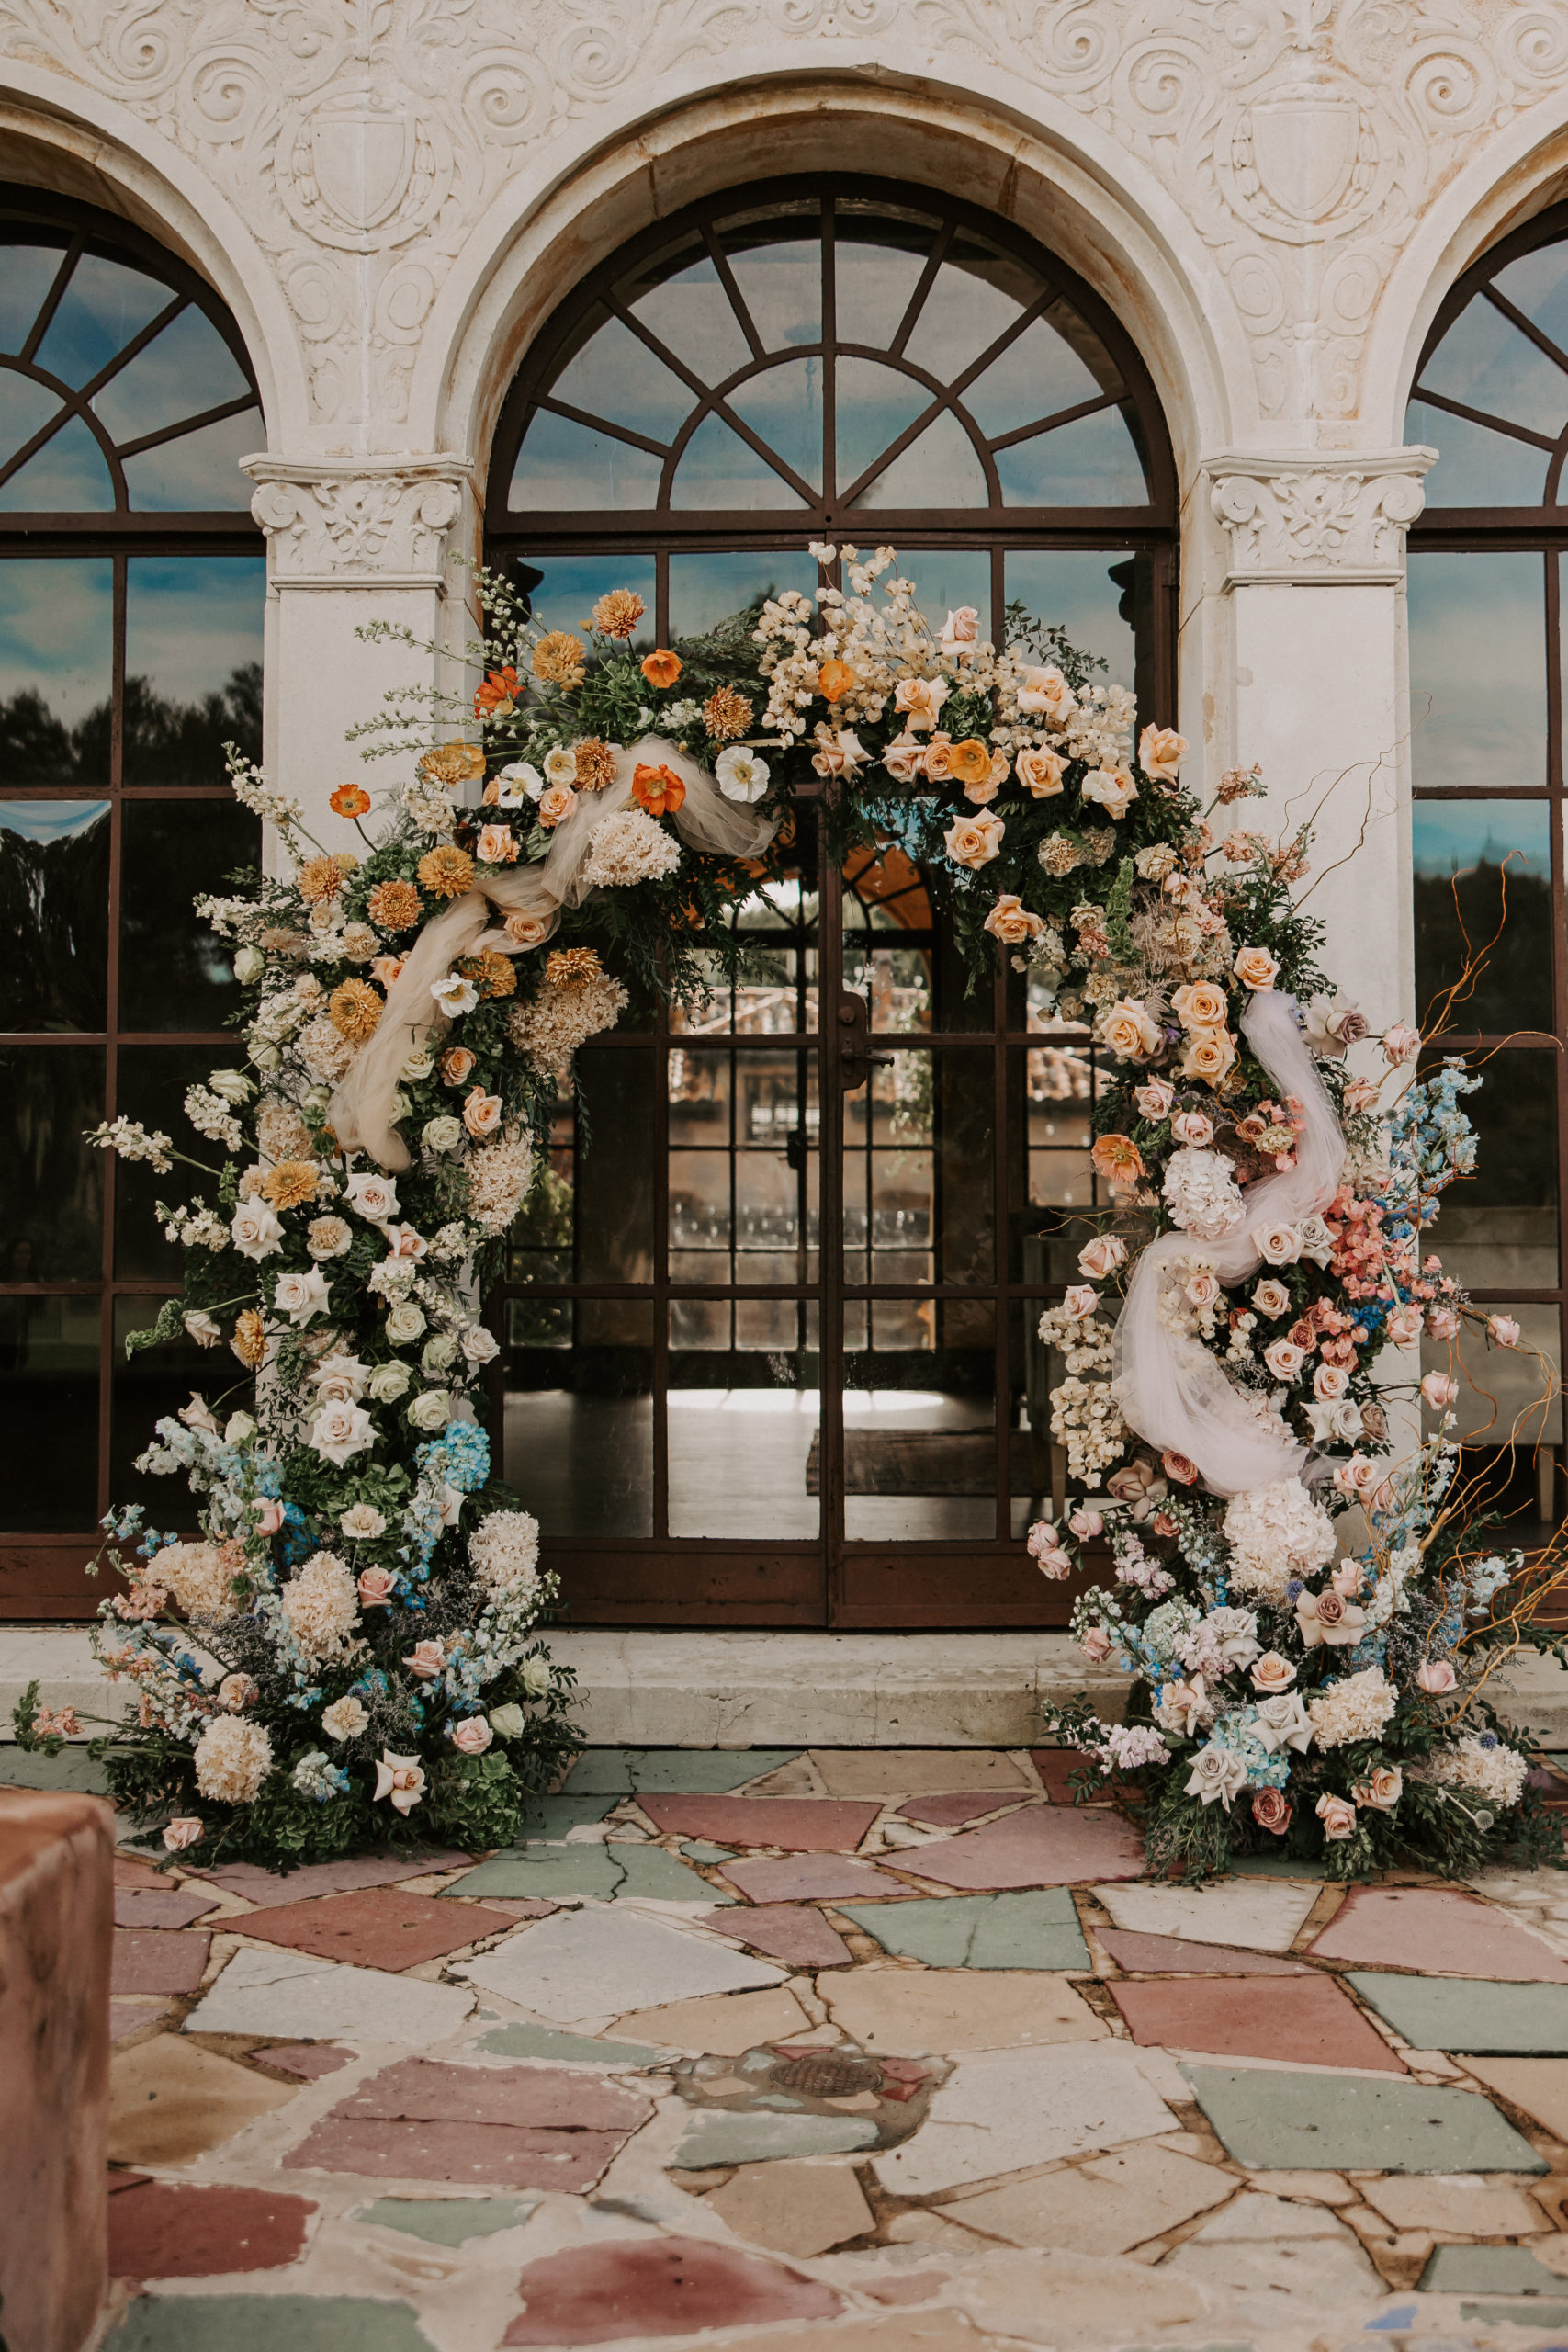 Jonathan took this inspiration and ran with it to create a beautiful muted rainbow floral arch.
Instead of using a traditional arch for the ceremony, our florist used over 40 types of blooms/floral to create an 8 foot tall massive rainbow arch which joins the array of colorful taper candles.